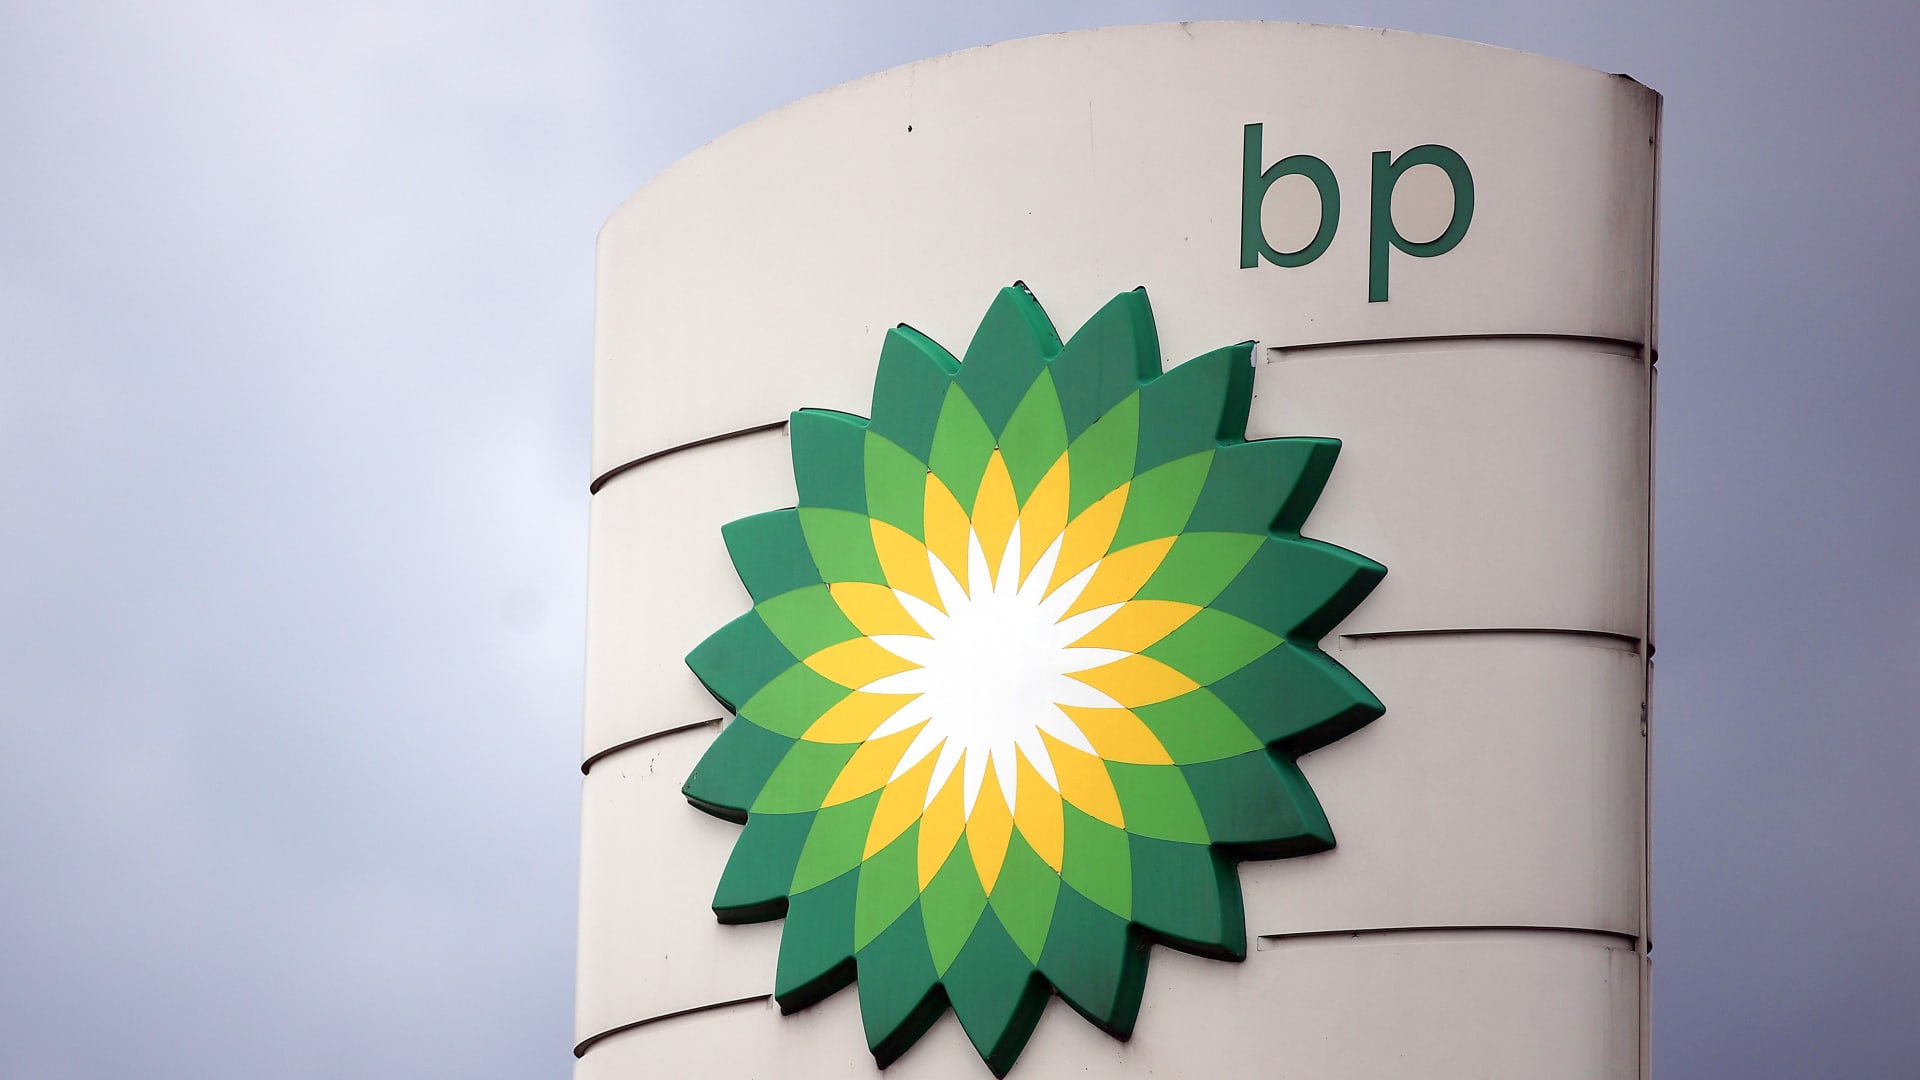 BP rakes in quarterly profit of $8.2 billion as oil majors post another round of bumper earnings